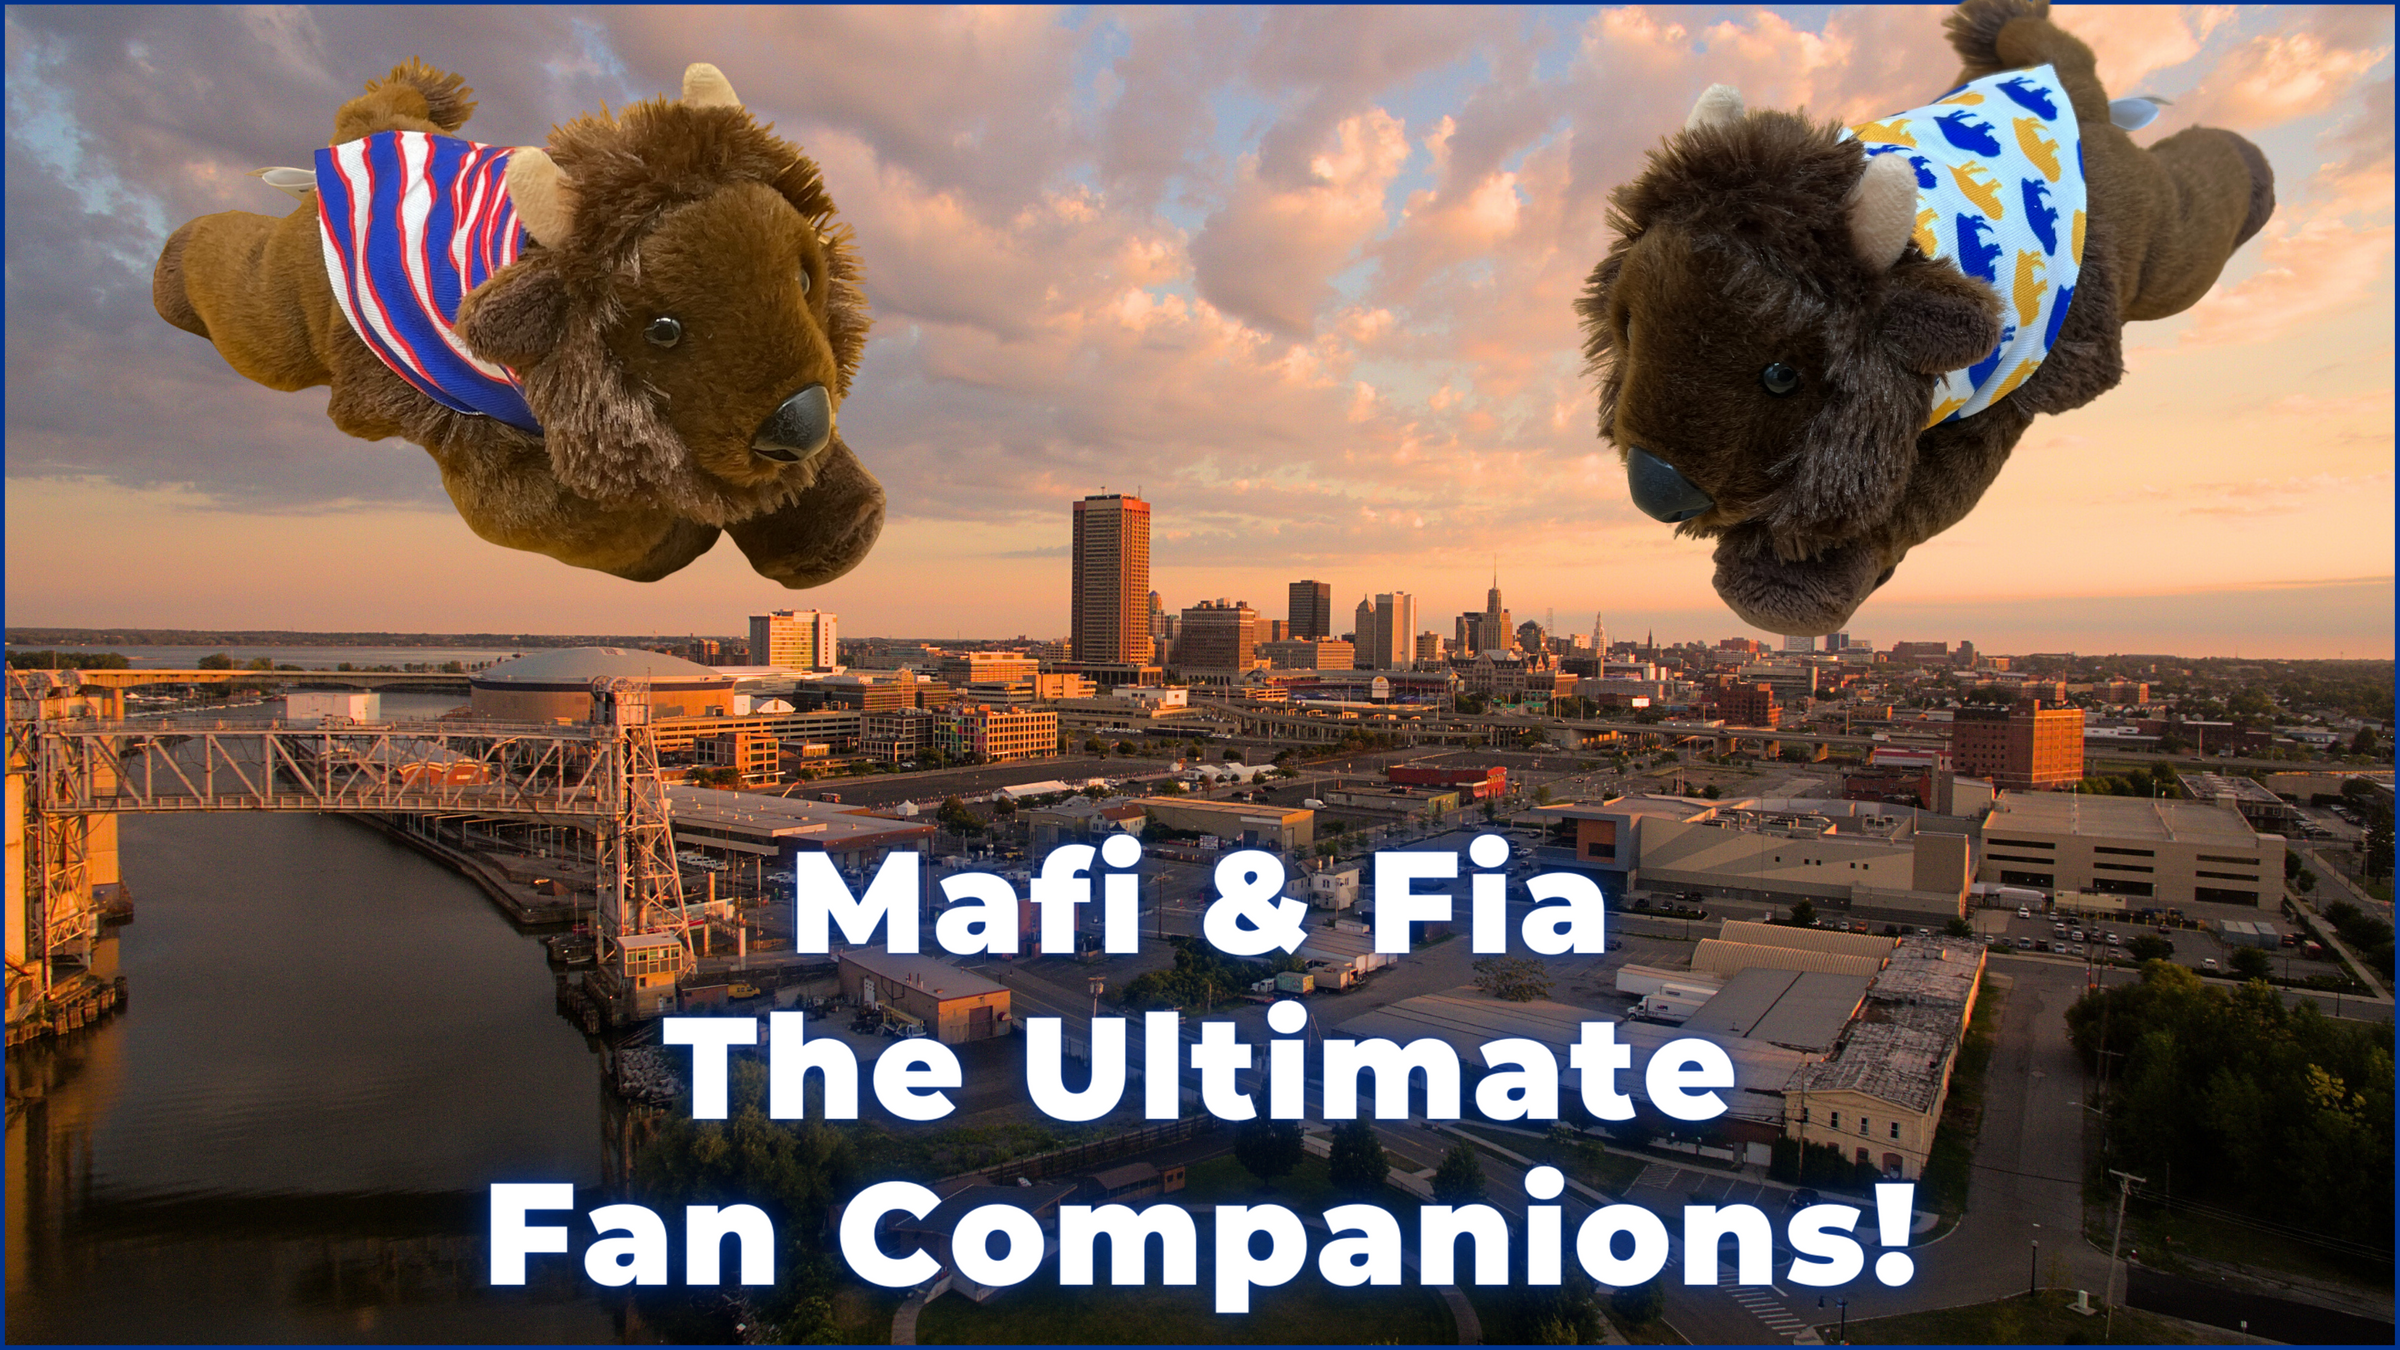 The Ultimate Fan Companions, Mafi & Fia, overlooking their adopted city of Buffalo NY.  They are the ultimate unique gifts for Buffalo Bills and Buffalo Sabres Fans.